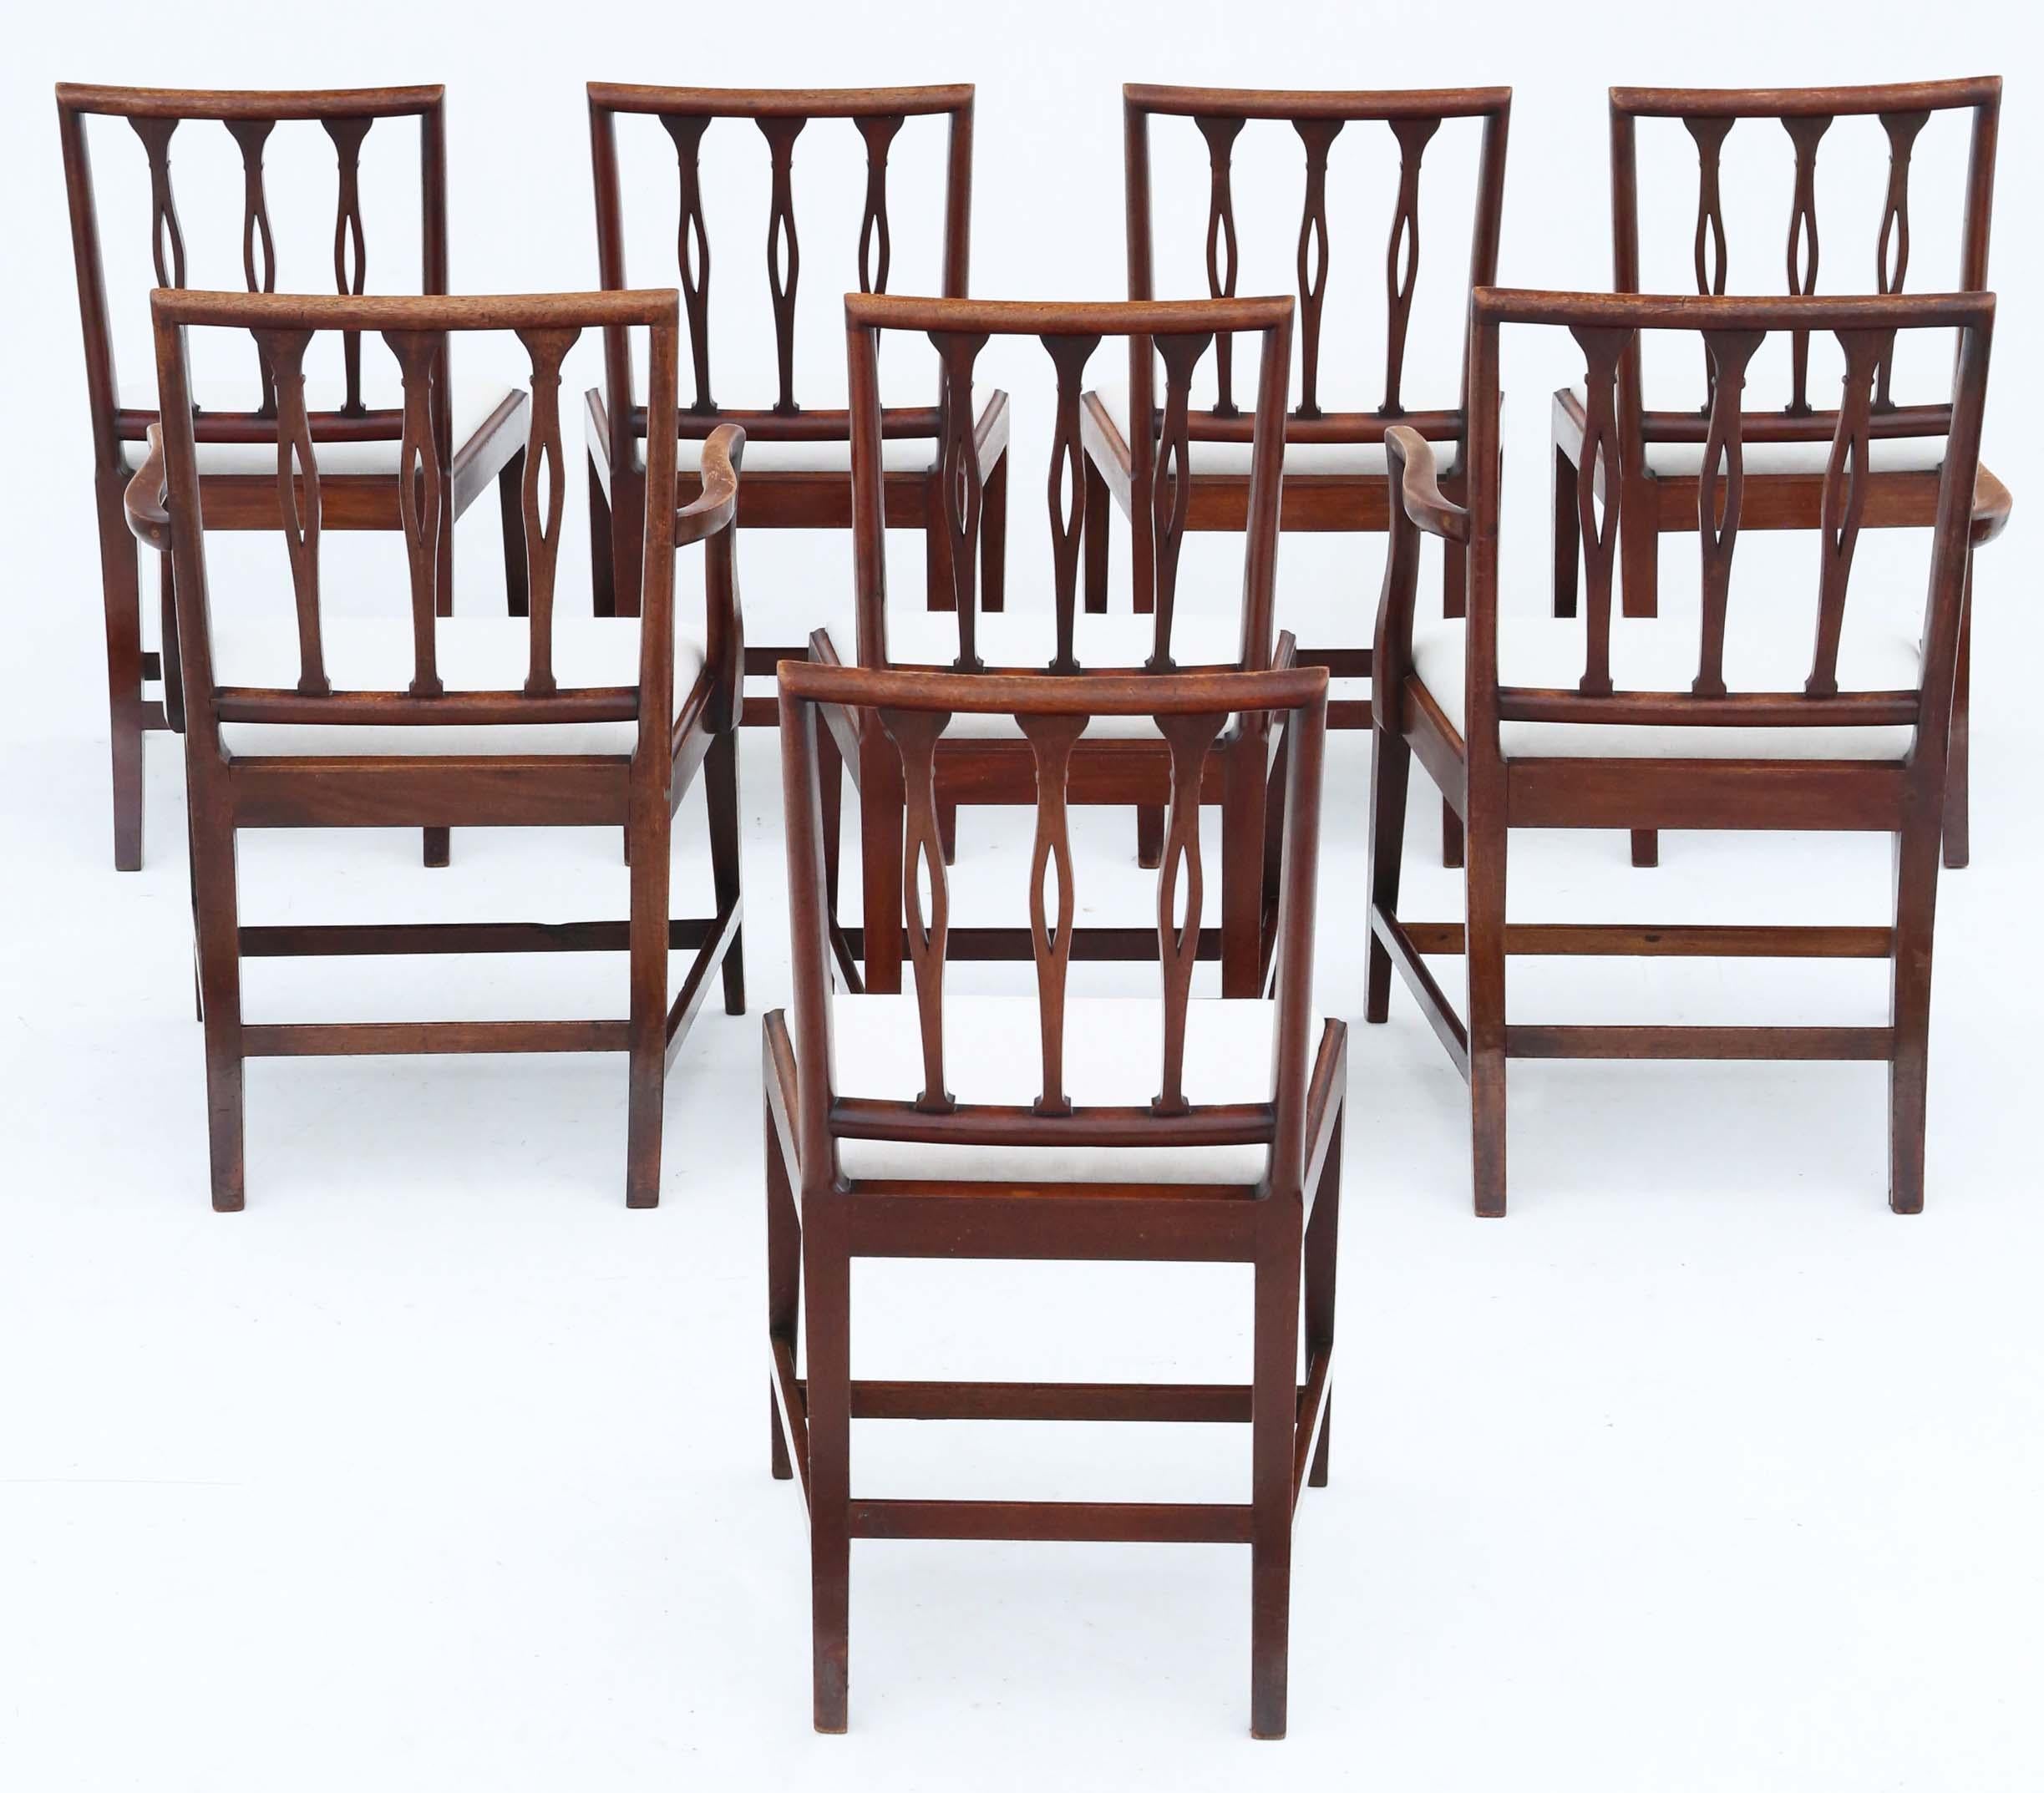 Indulge in the timeless elegance of this fine quality set of 8 (6 + 2) Georgian mahogany dining chairs, dating back to circa 1820. Crafted with precision and attention to detail, these chairs exude the charm of the Georgian era.

Each chair boasts